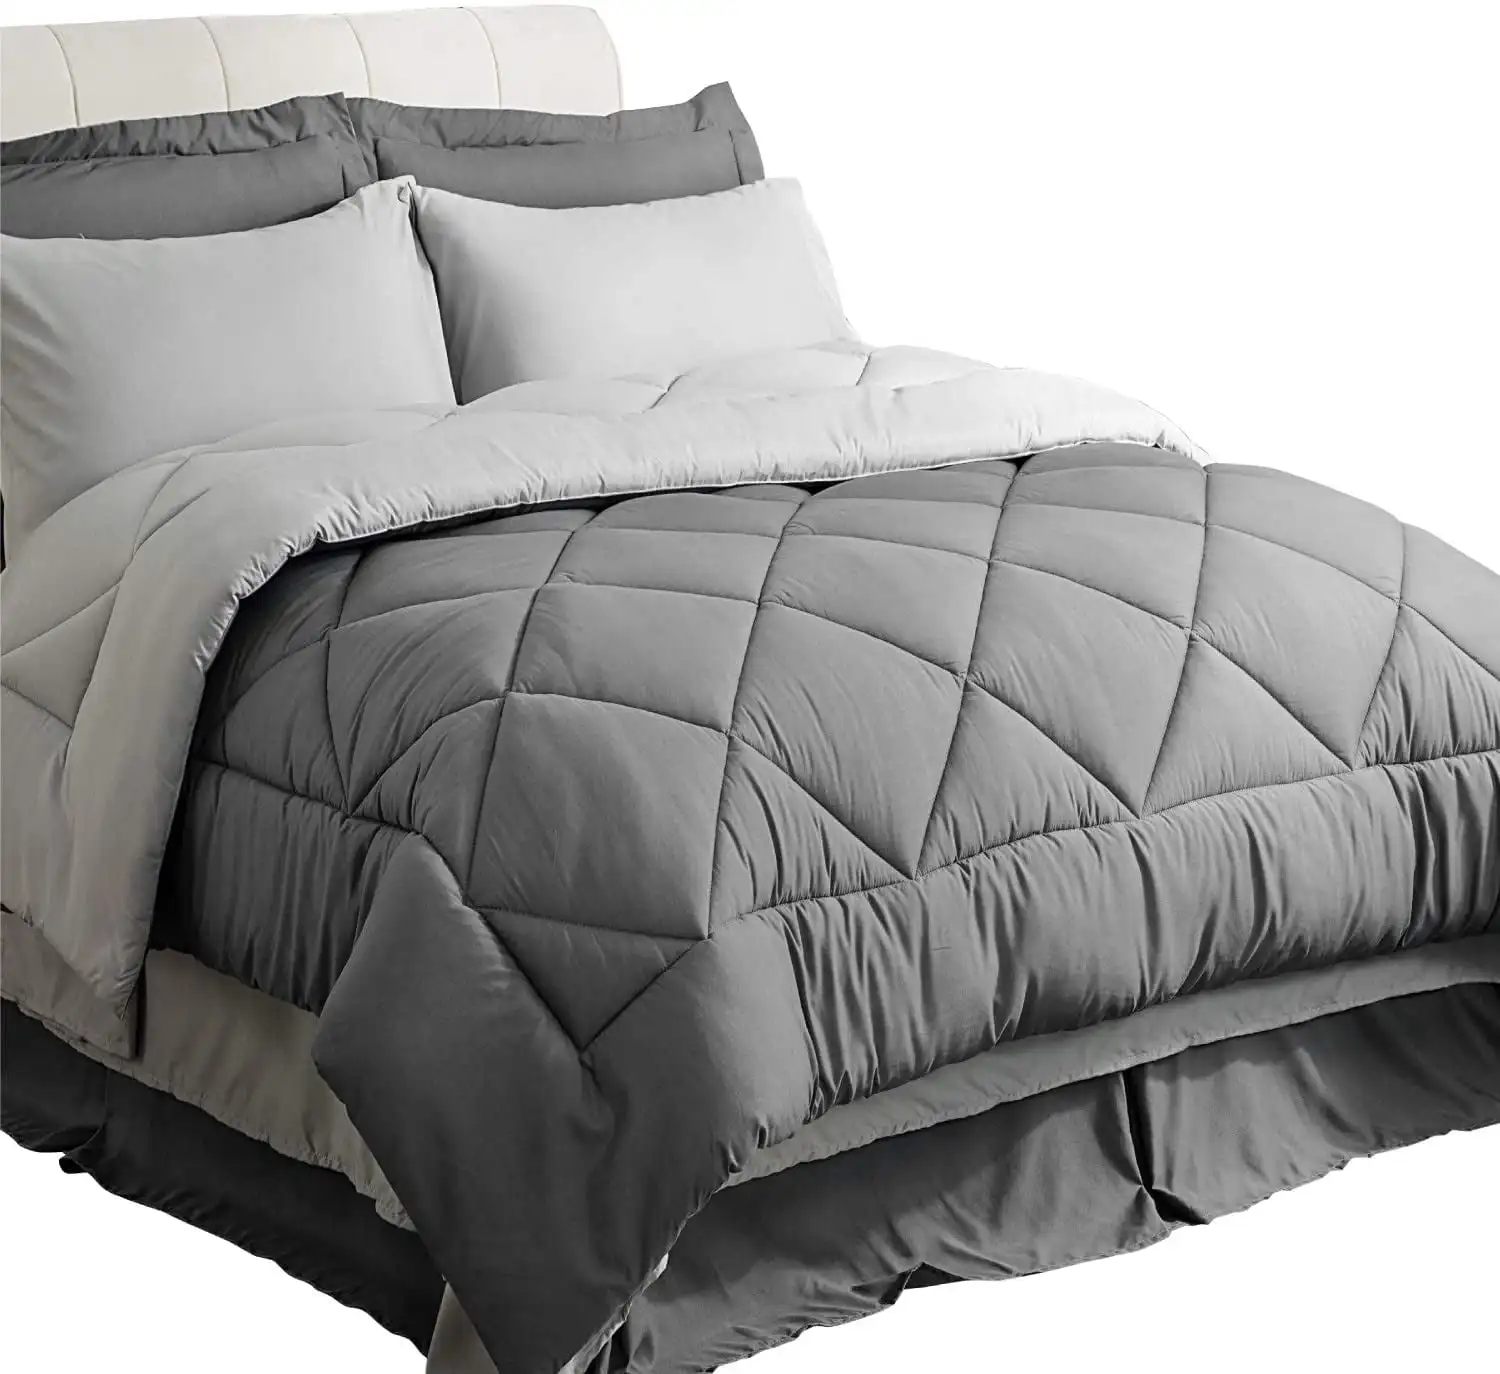 

Bedsure Full/Queen Comforter Set - 7 Pieces Reversible Bed Set Bed in A Bag Queen with Comforters, Sheets, Pillowcases & Shams